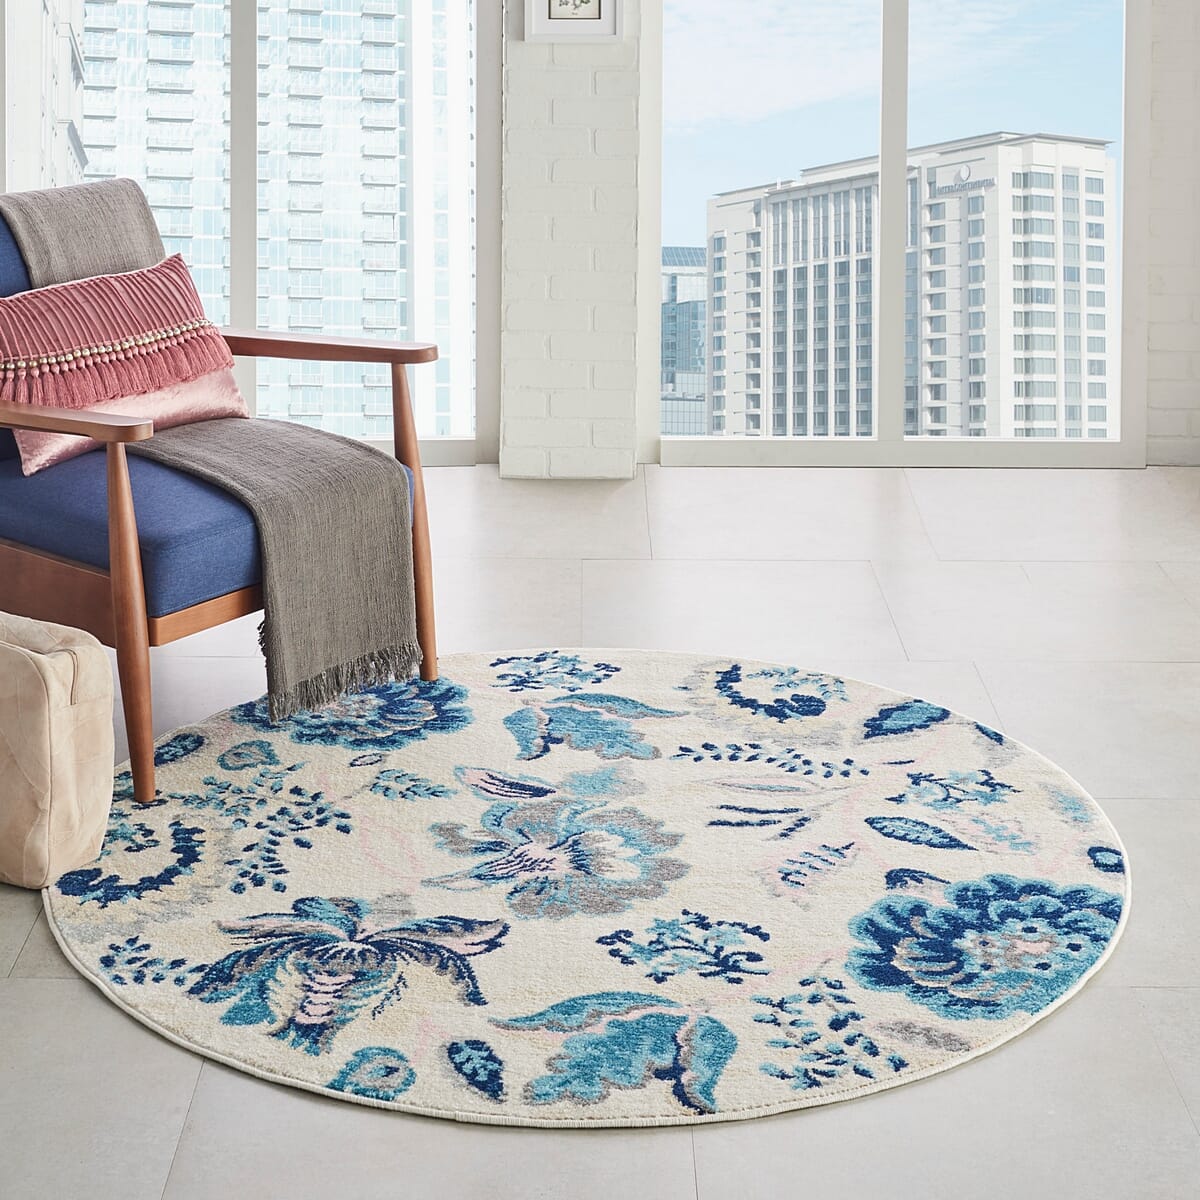 Nourison Tranquil Tra02 Ivory / Light Blue Floral / Country Area Rug